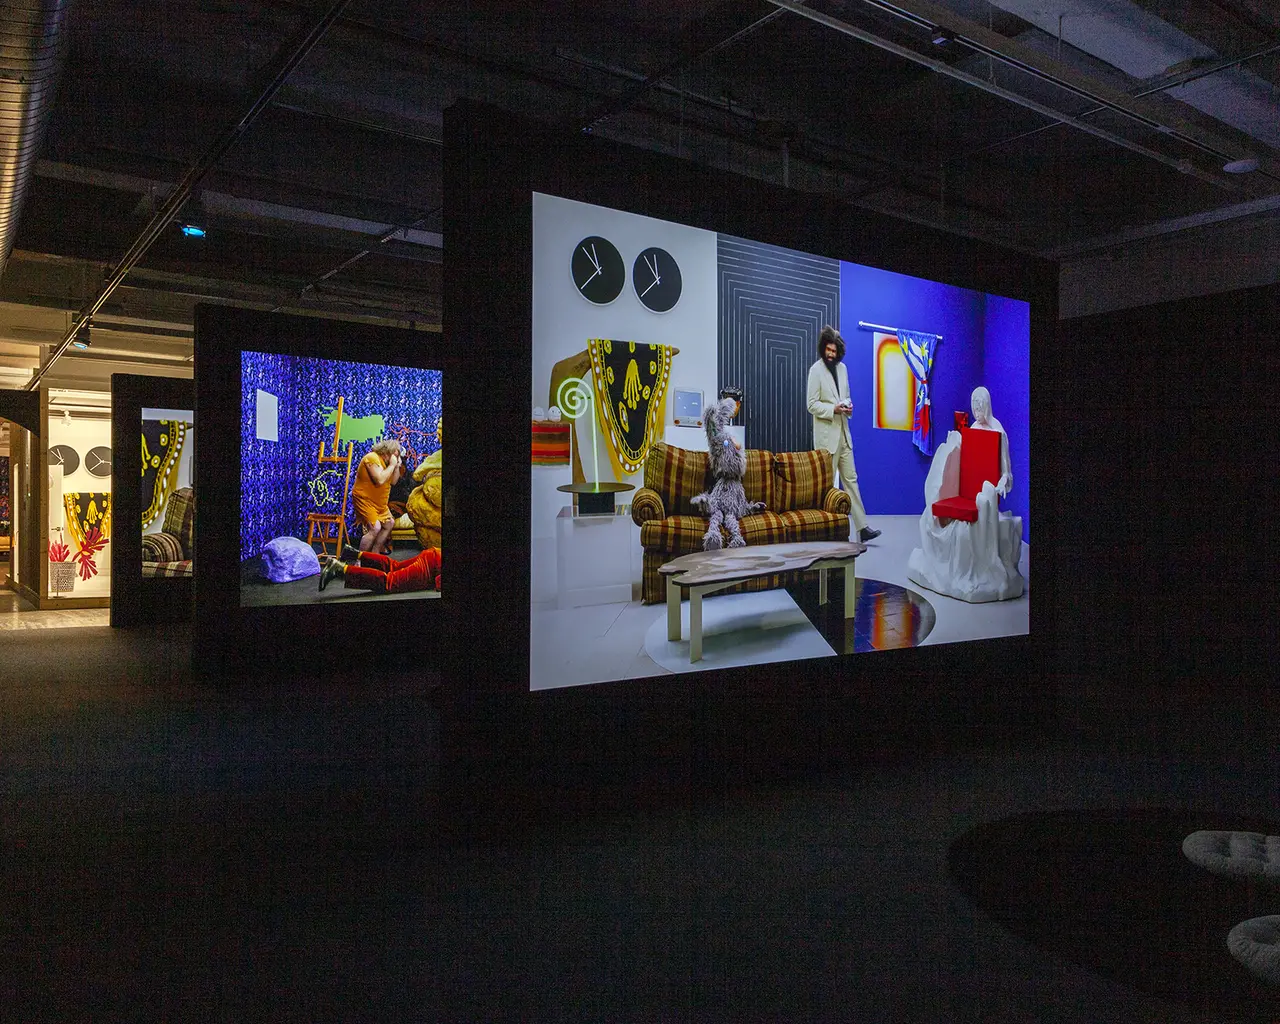 Jayson Musson, in collaboration with The Fabric Workshop and Museum, His History of Art, 2022, installation view, Philadelphia, PA. Photo by Carlos Avendaño.